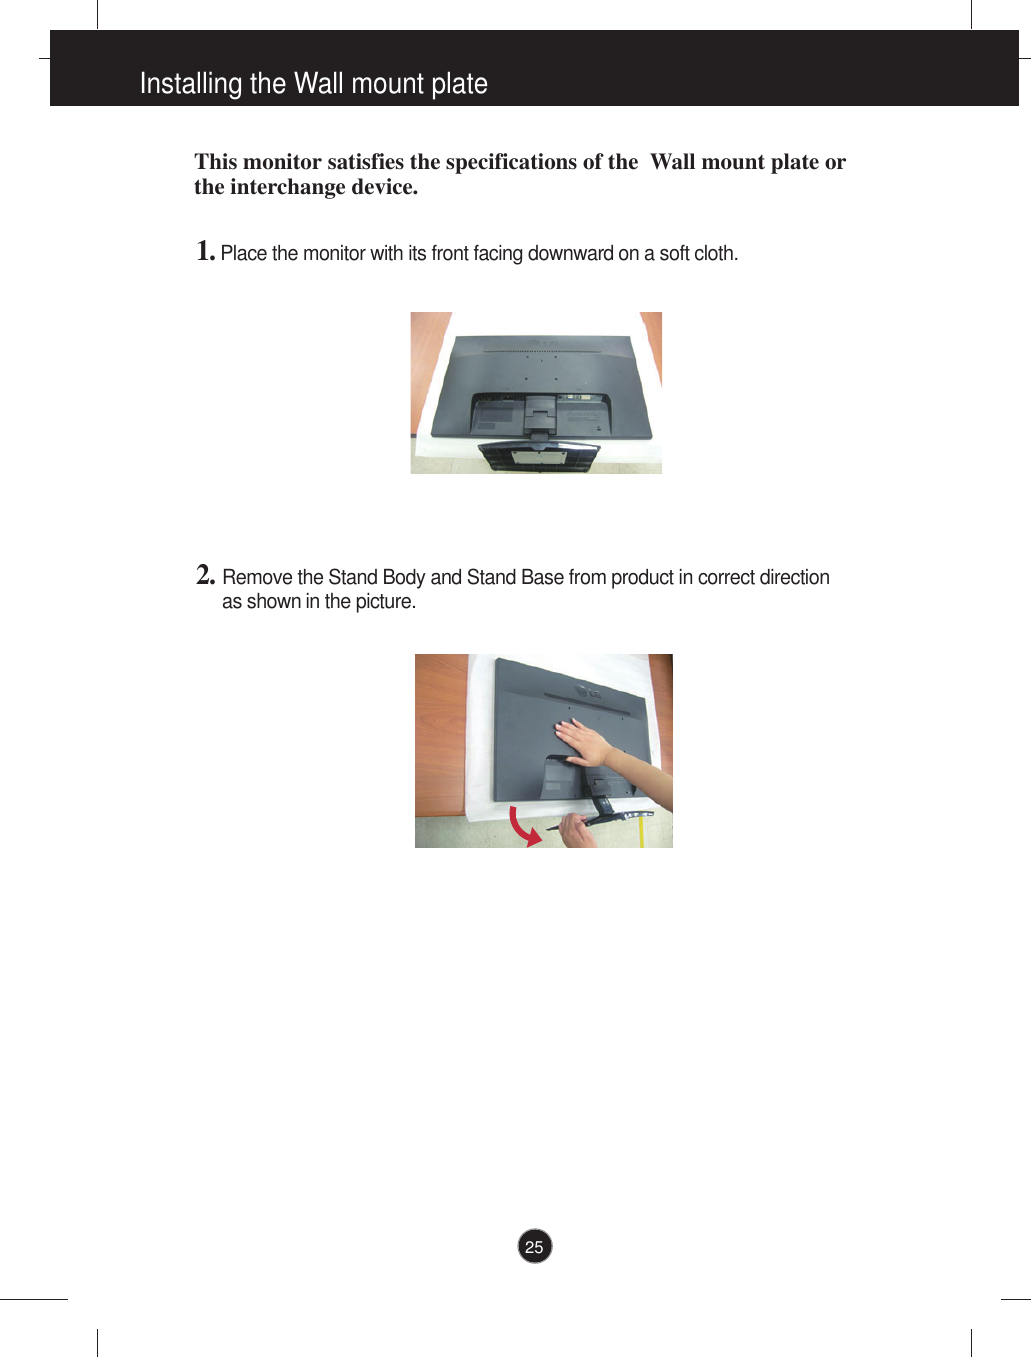 Installing the Wall mount plateThis monitor satisfies the specifications of the  Wall mount plate orthe interchange device.1. Place the monitor with its front facing downward on a soft cloth.2. Remove the Stand Body and Stand Base from product in correct direction as shown in the picture.25